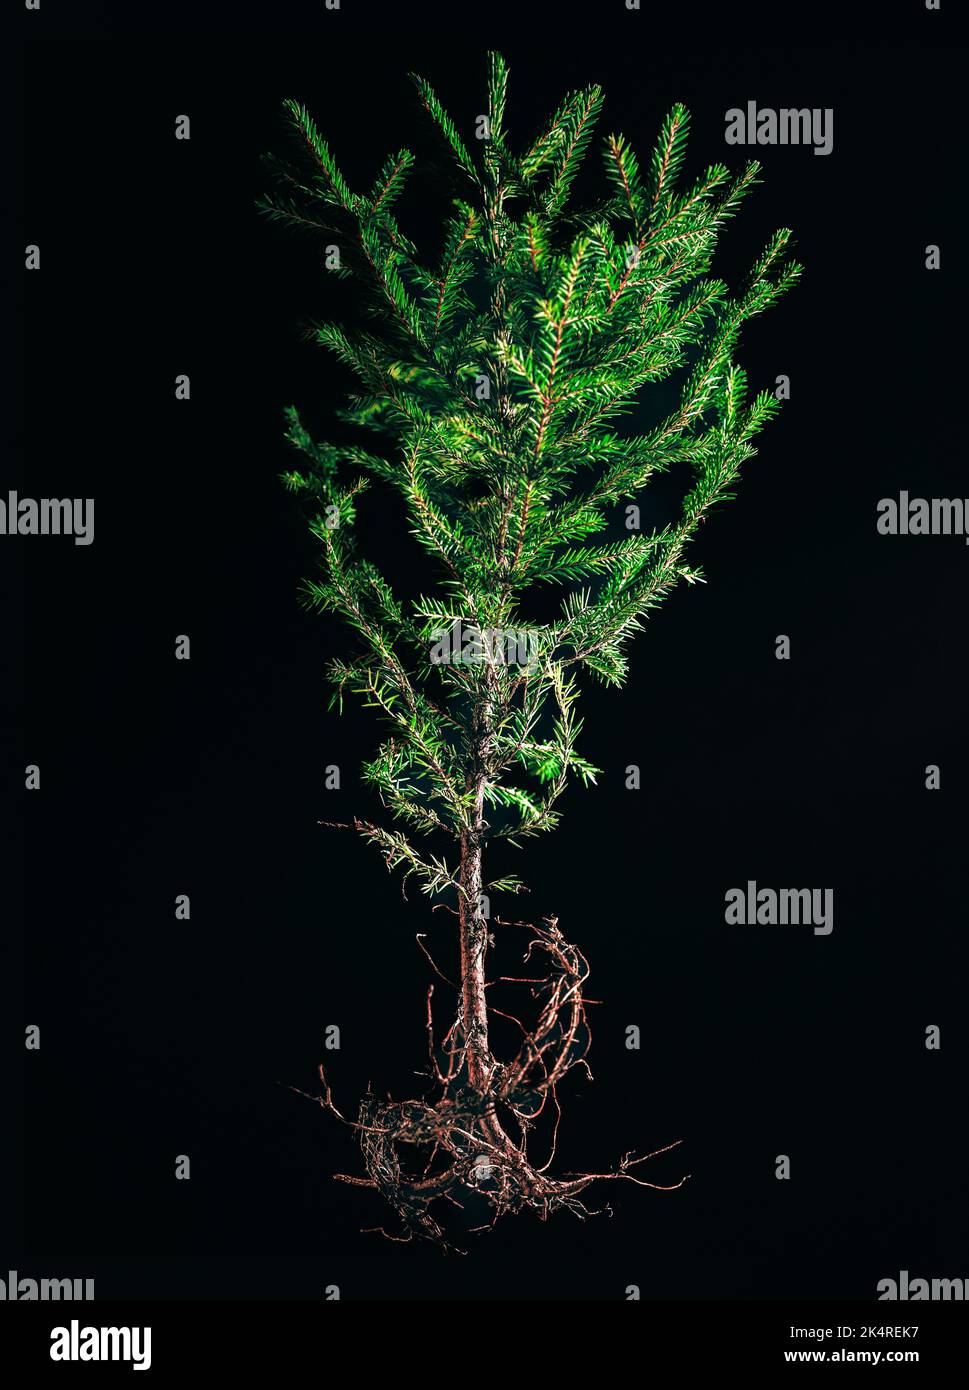 An isolated shot of an uprooted young fir tree on a black background Stock Photo